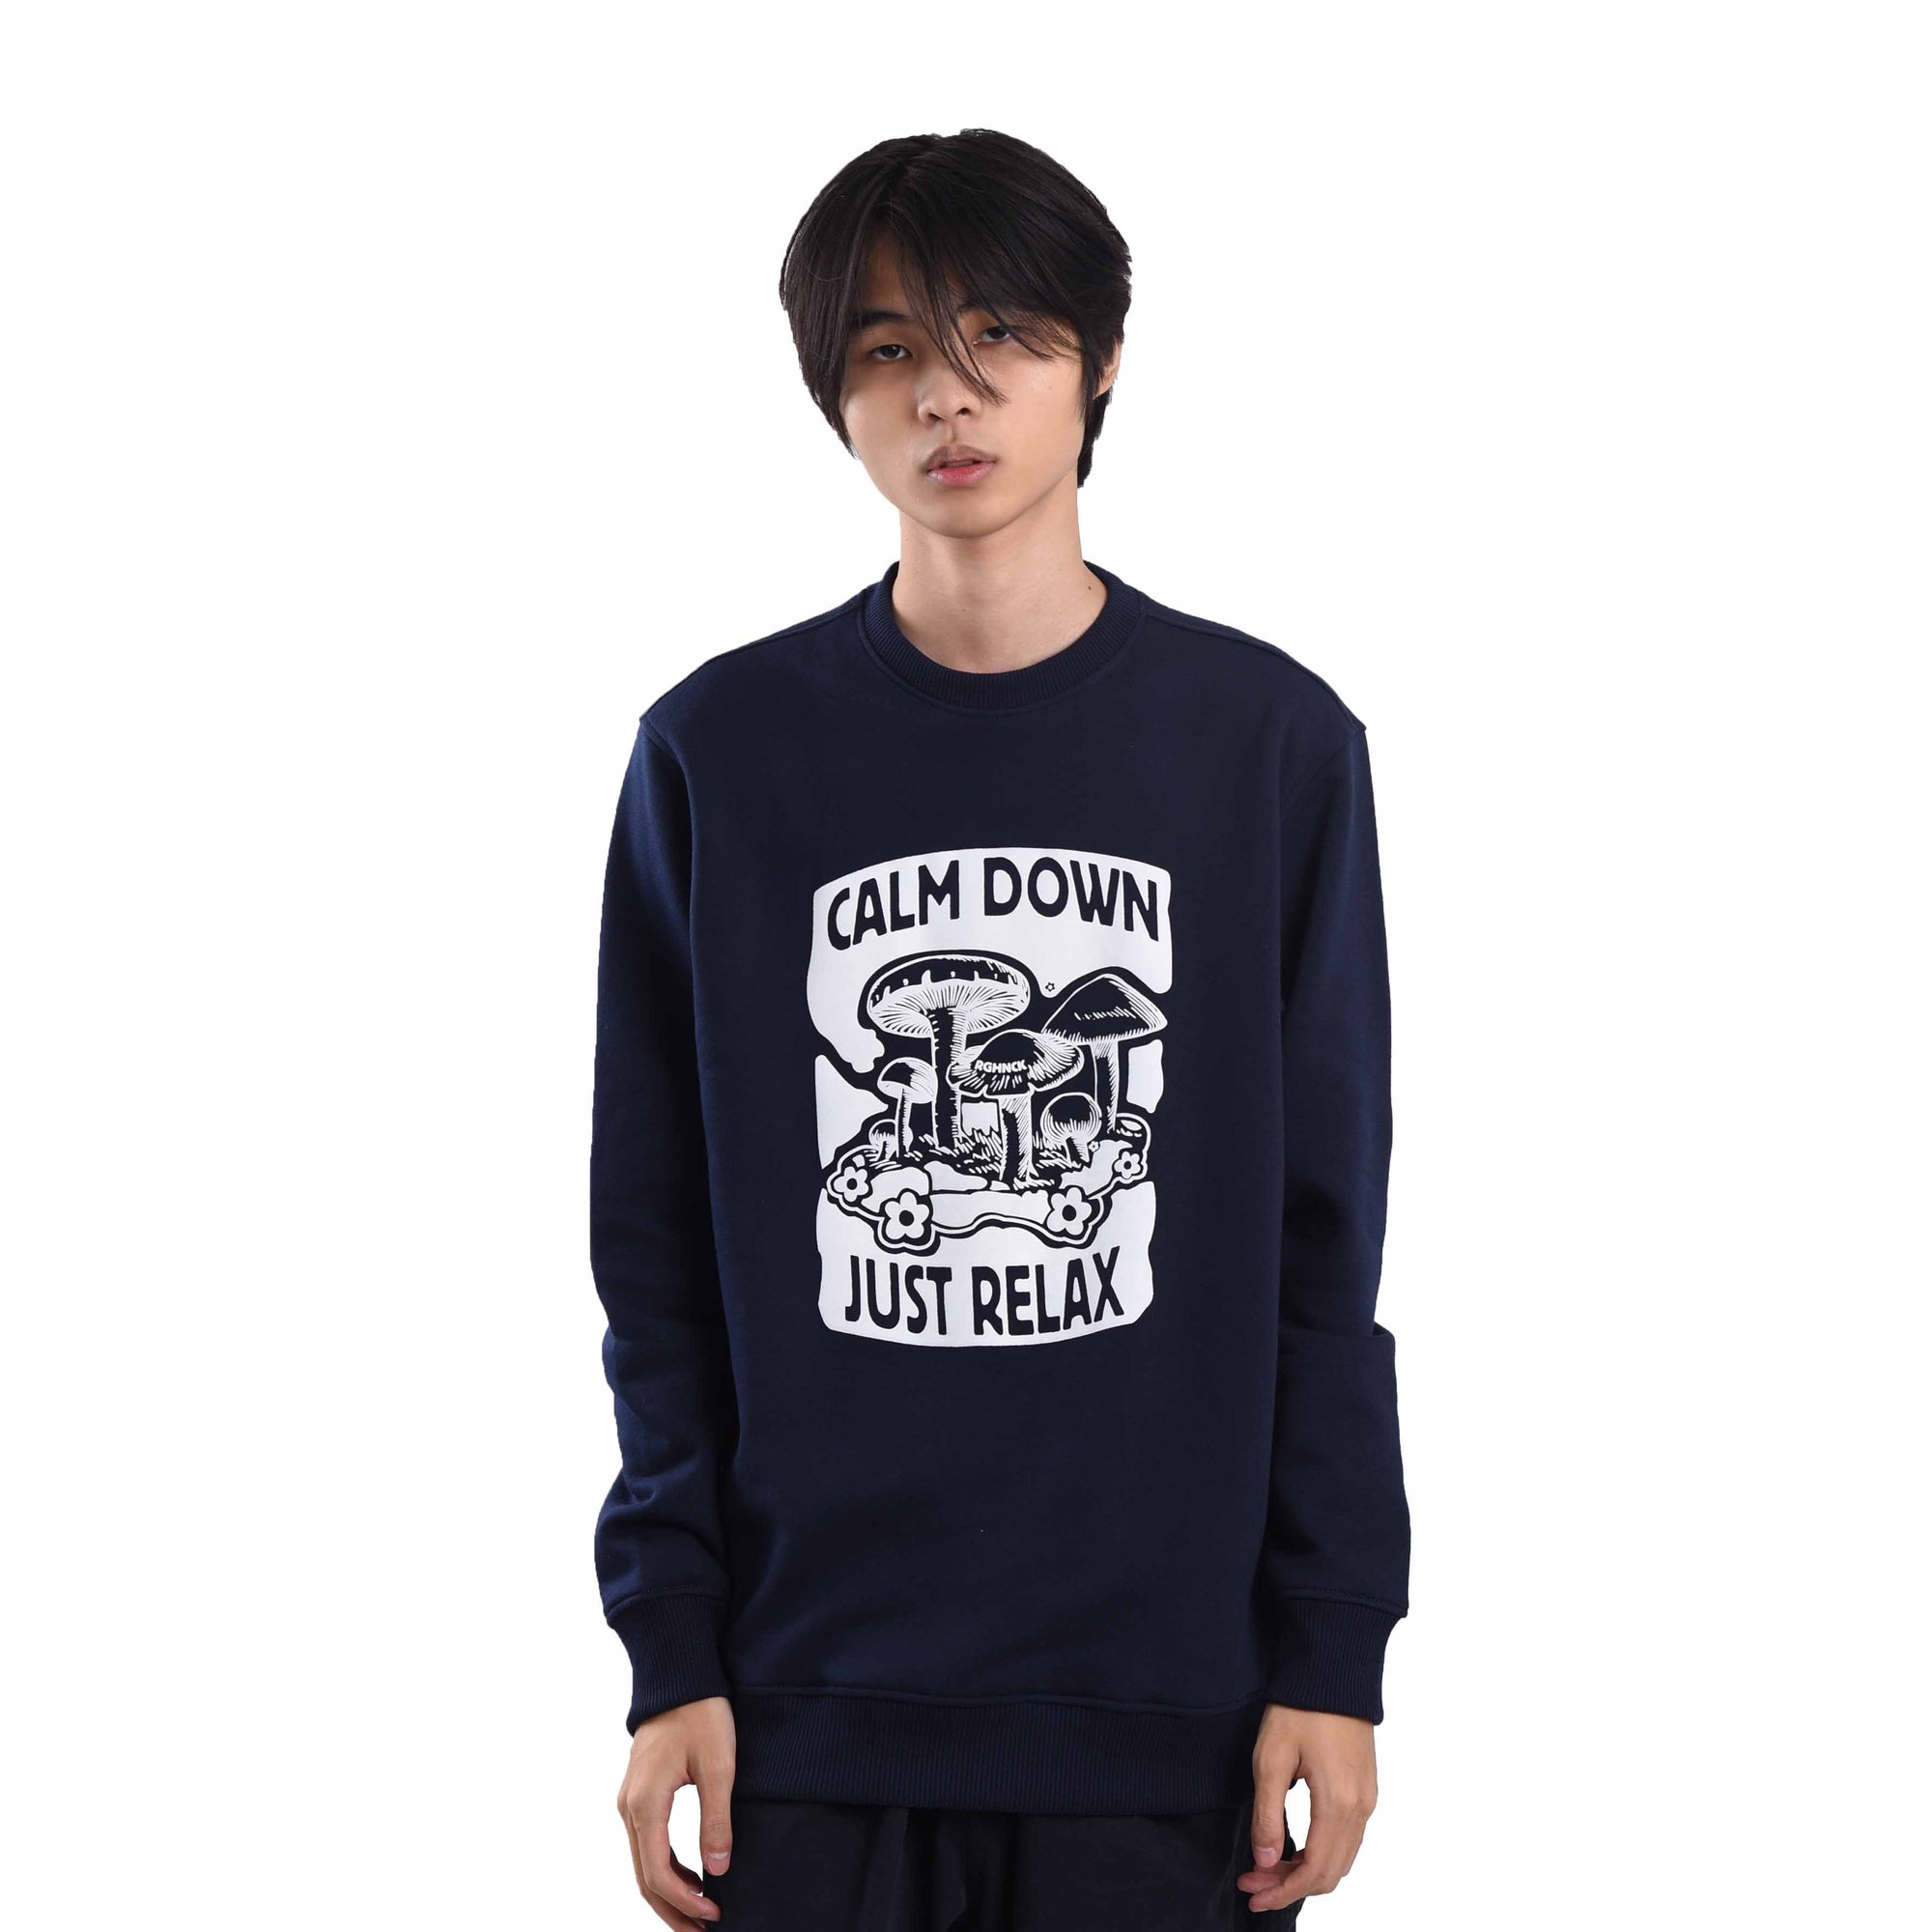 SS349 Calm Down Just Relax Navy Crewneck